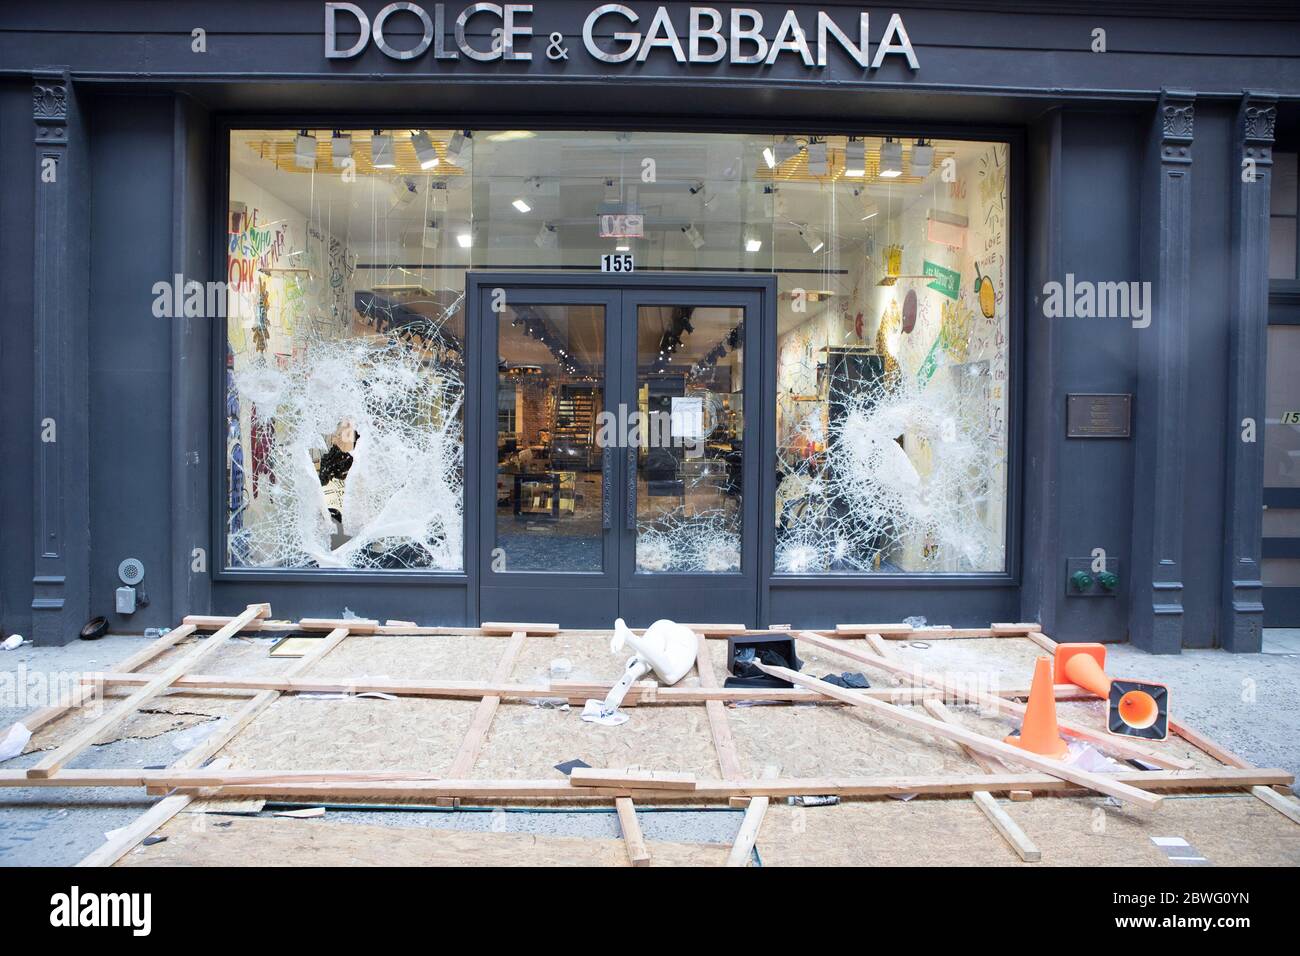 New York, New York, USA. 1st June, 2020. The Dolce Gabbana store in Soho was looted early Monday morning in New York, New York, Many other er New York Stores were also damaged and over 200 arrest were made from the Soho looting Credit: Brian Branch Price/ZUMA Wire/Alamy Live News Stock Photo